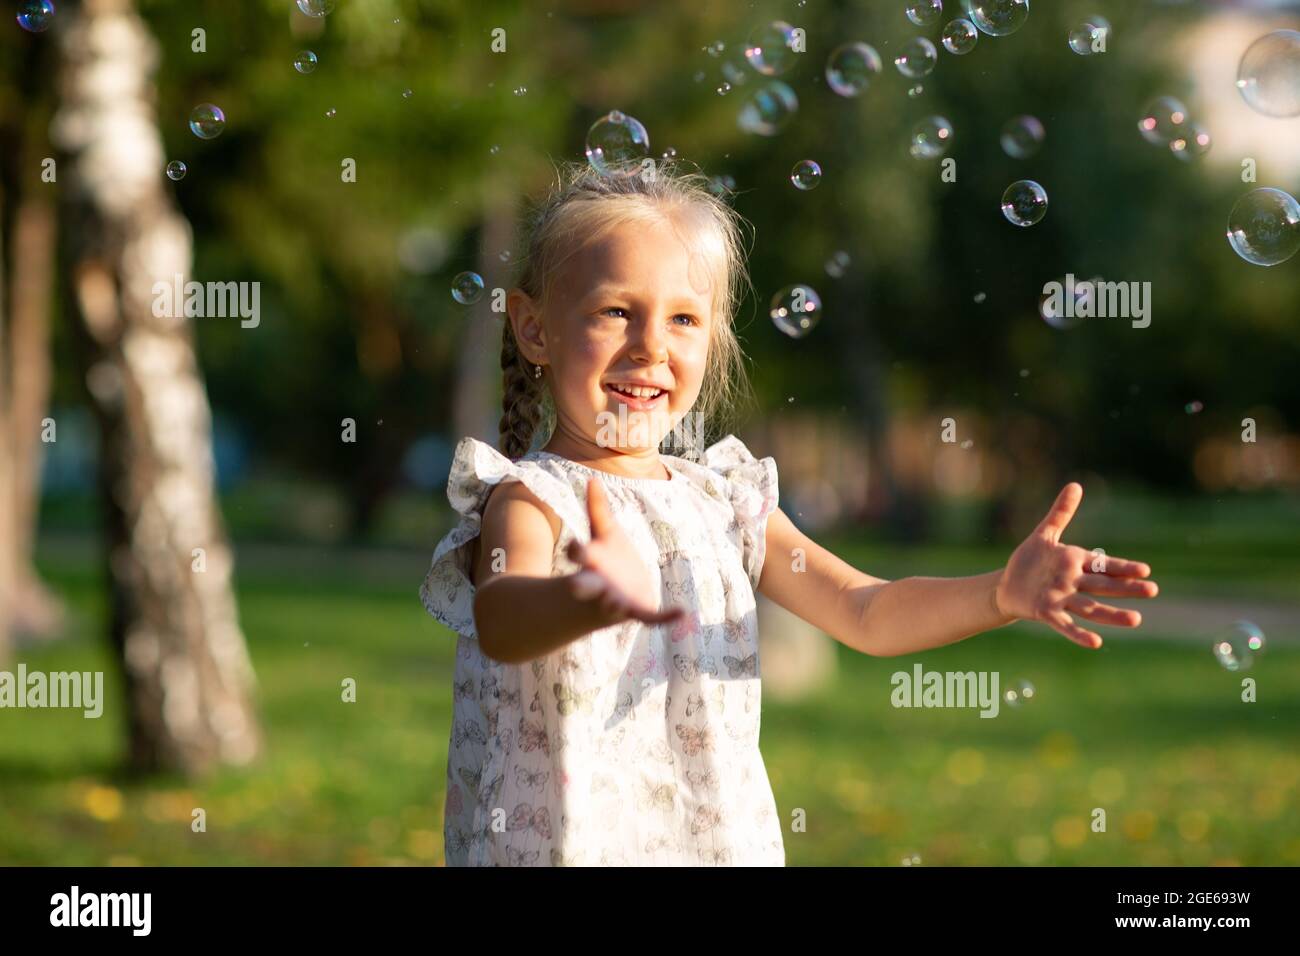 Little cute girl in the summer park blowing bubbles and having fun. Stock Photo